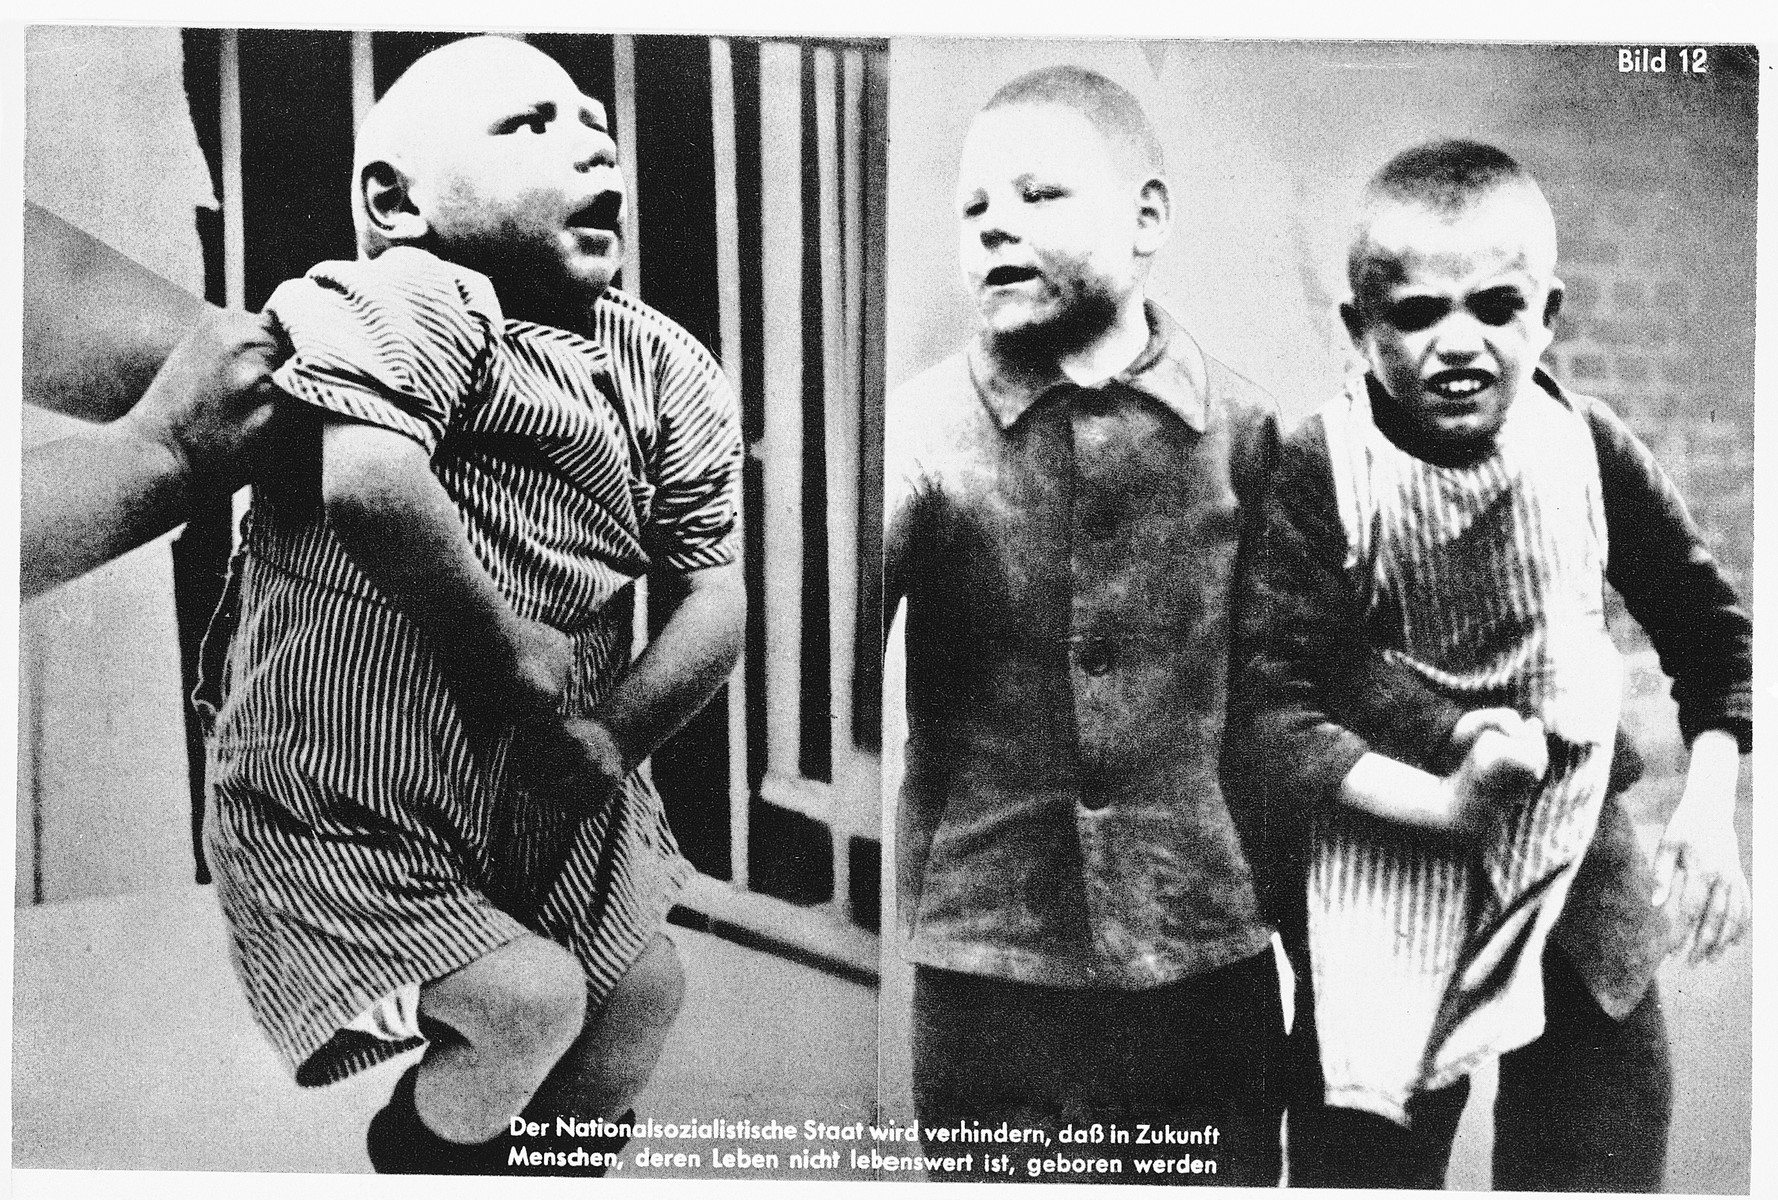 Nazi propaganda composite photograph showing mentally disabled children.

The original caption reads: "The National Socialist State in the future will prevent people whose lives are not worth living from being born."